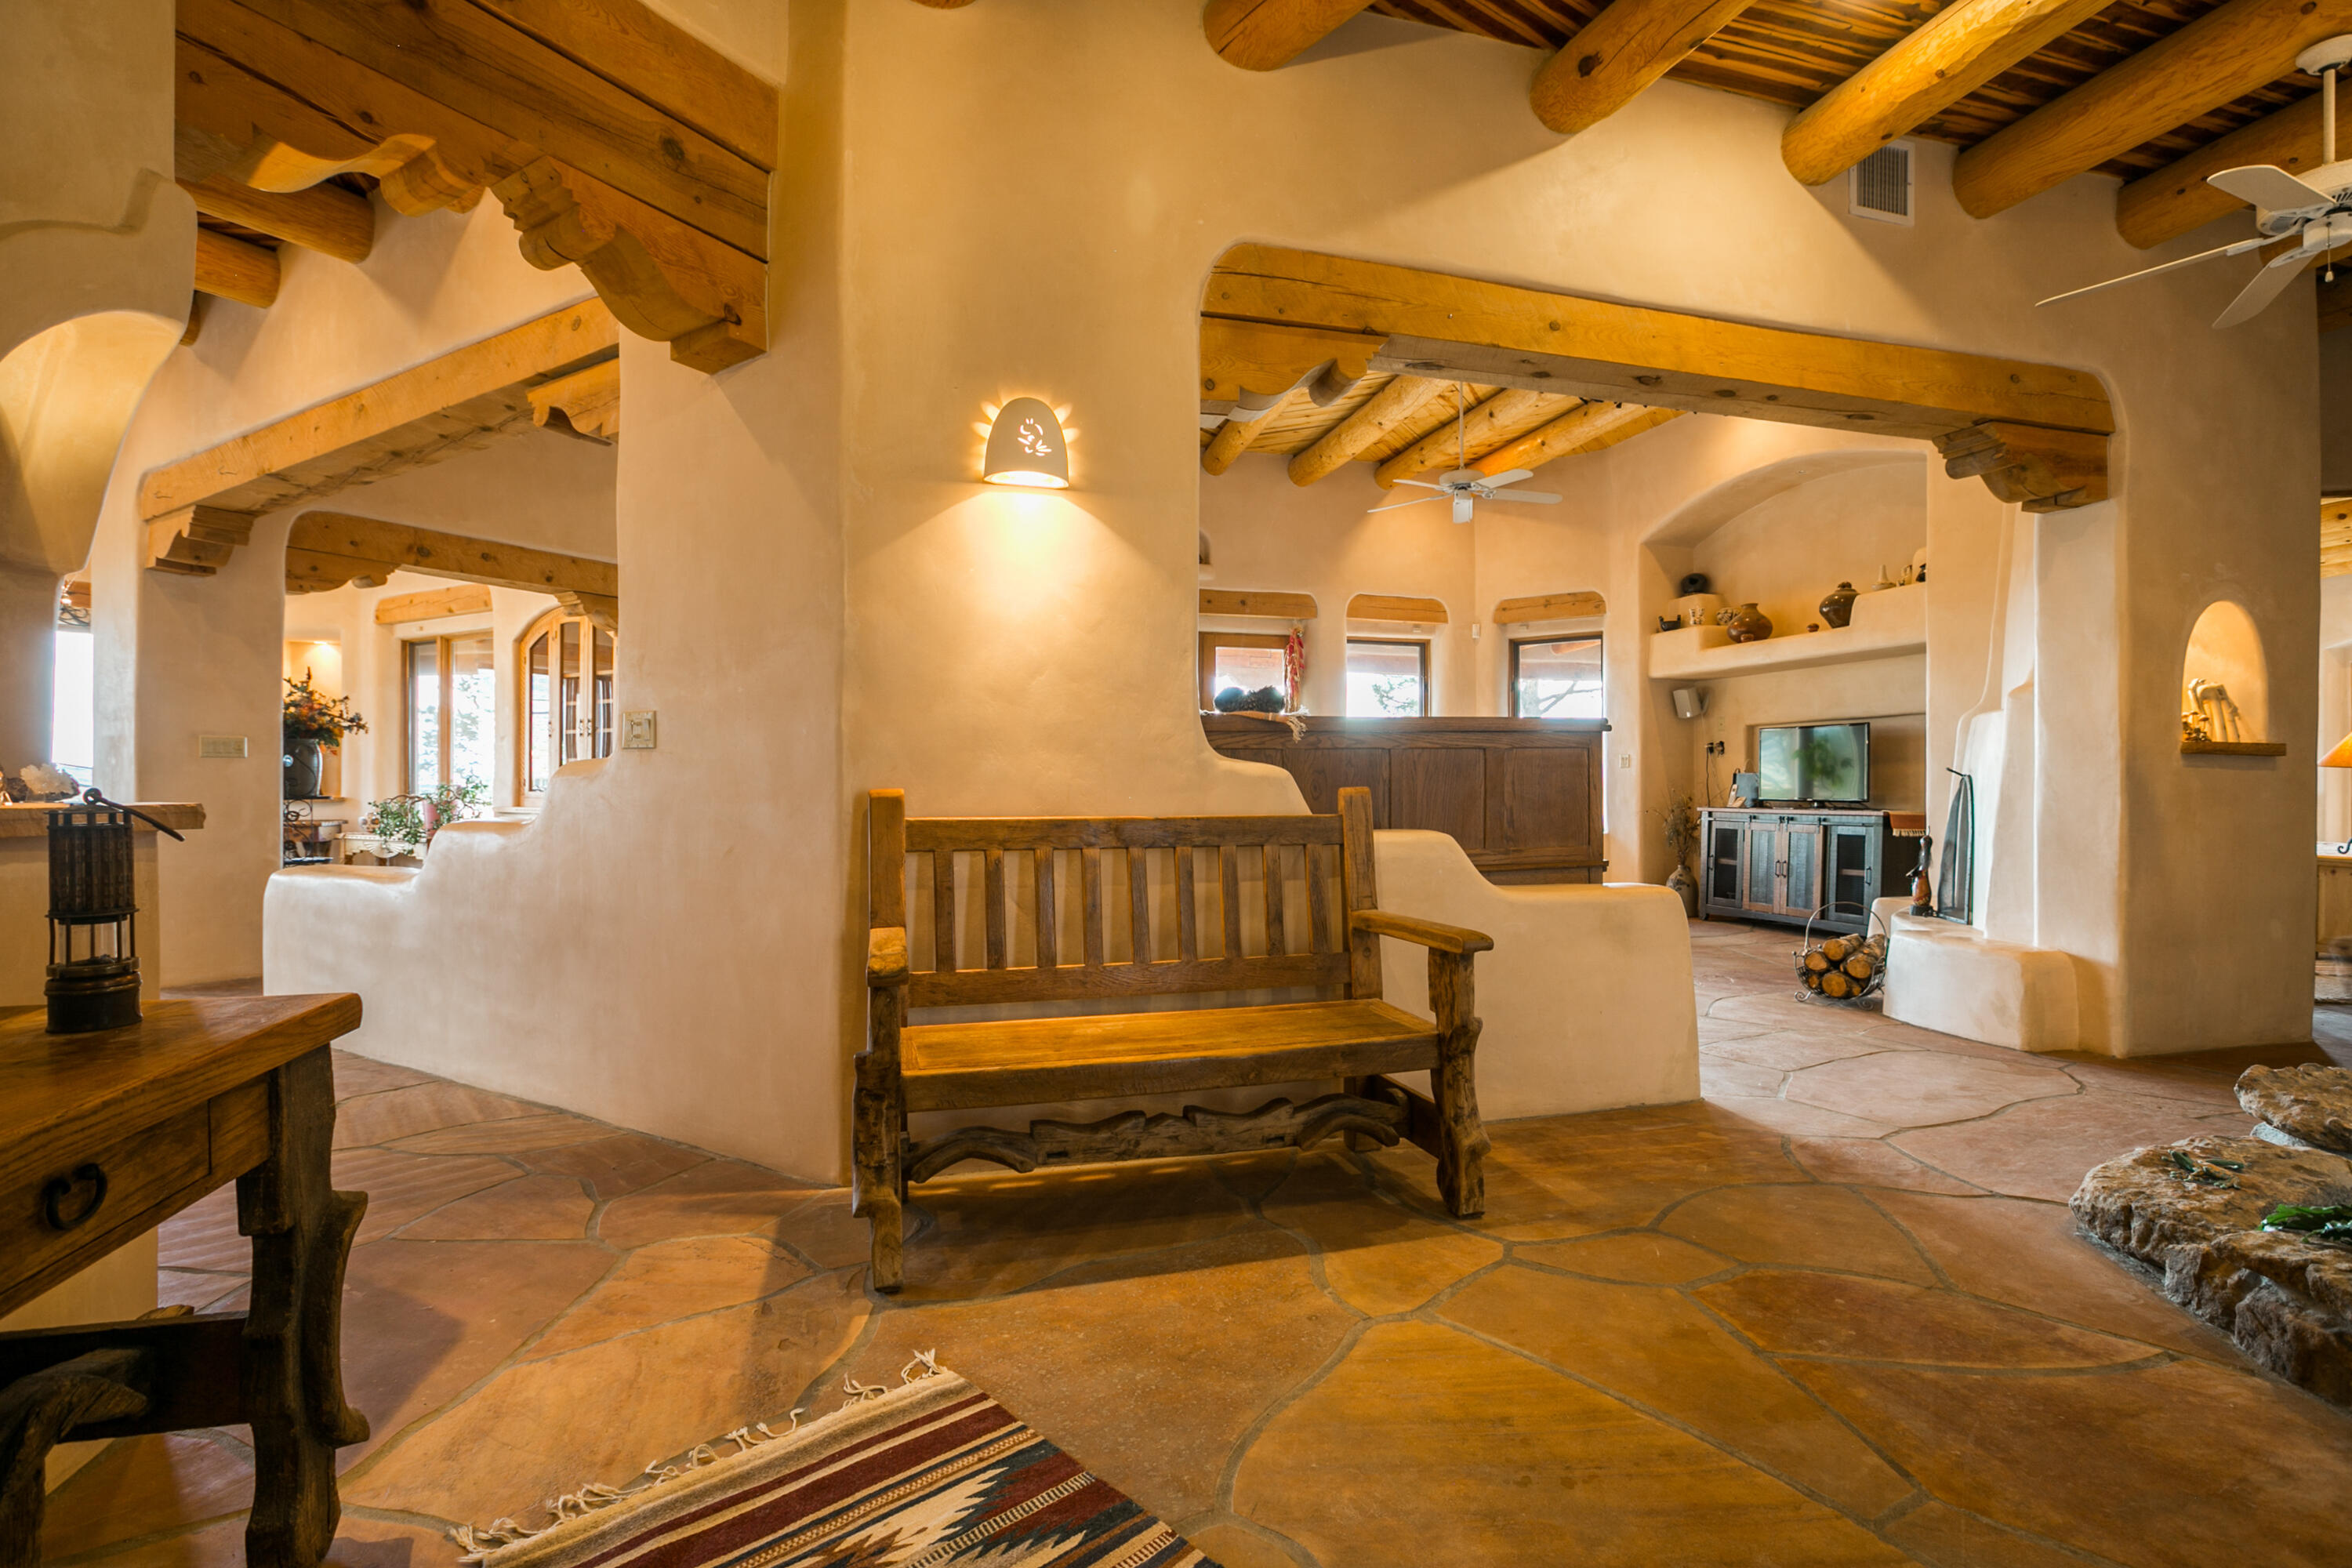 Rarely does a home of this Character, Quality and Comfort come to the market. This Enchanting and Stunning Santa Fe Style Home is your next dream location. Set in the foothills of the north Sandia Peak Mountains, this home is on just under 5 Acres with incredible views of Mountains, Mesas, Lights, Sunsets and Stargazing. Built as a handcrafted home with the Owner- Respected Builder Nick Garcia really shows his craftsmanship in this one. From the Front Door to the outside living spaces, your sense of place is a home with comfort everywhere. Wood Ceilings, Vigas, Plastered Walls, and incredibly gorgeous sandstone floors are yours to enjoy. The home flows freely from the gracious great room, with Fountain and Handcrafted Kiva Fireplace. Click the ''more'' tab from here.